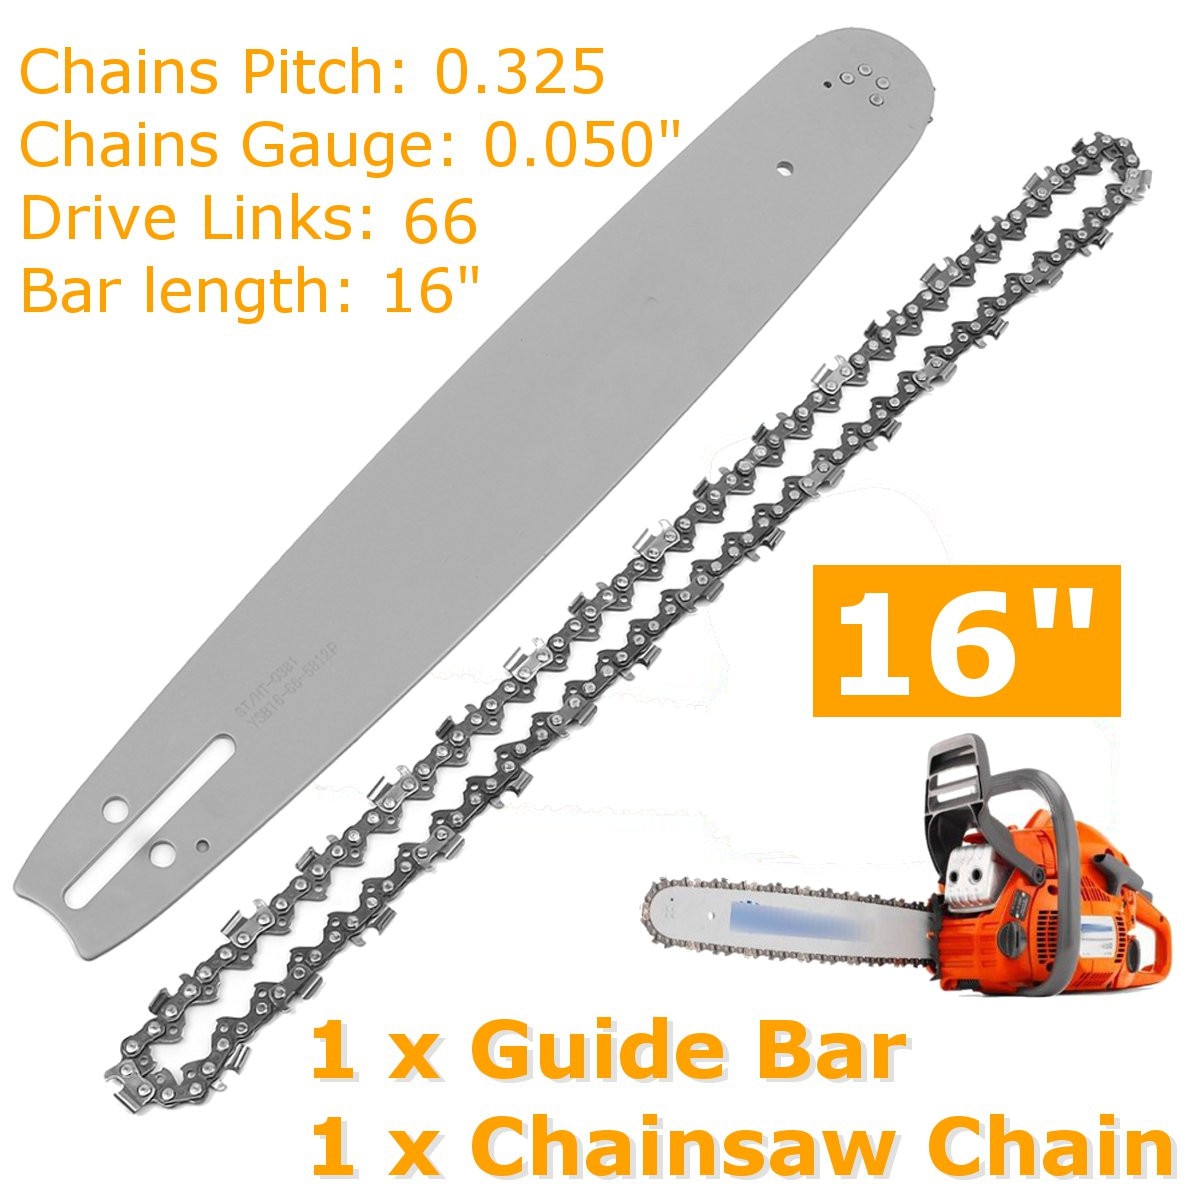 16 Inch 0.325 Toonhoogte Ketting &amp; Guide Bar Semi Beitel Chain Past Voor Husqvarna Poulan 36 41 50 51 55 346XP 450 455 460 66DL Kettingzaag